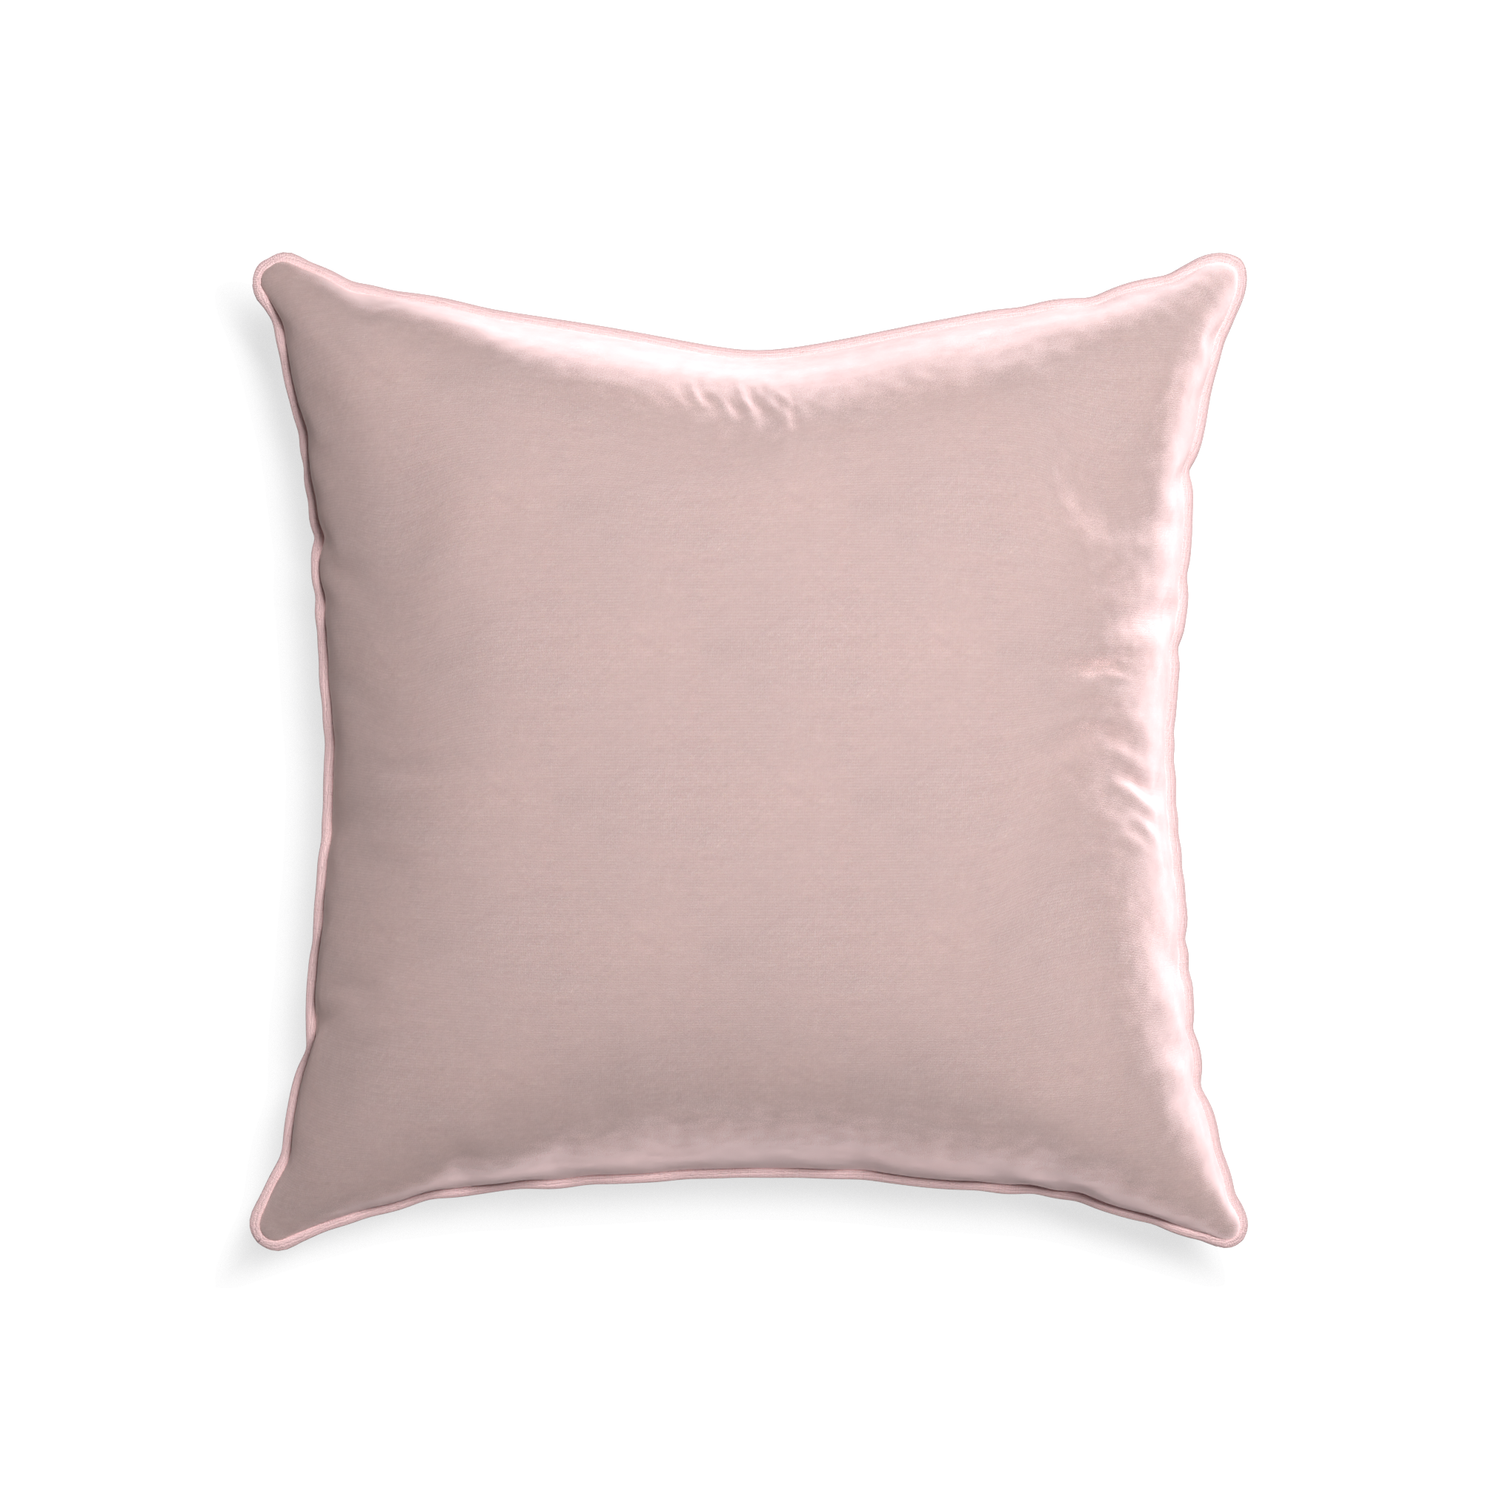 square light pink velvet pillow with light pink piping